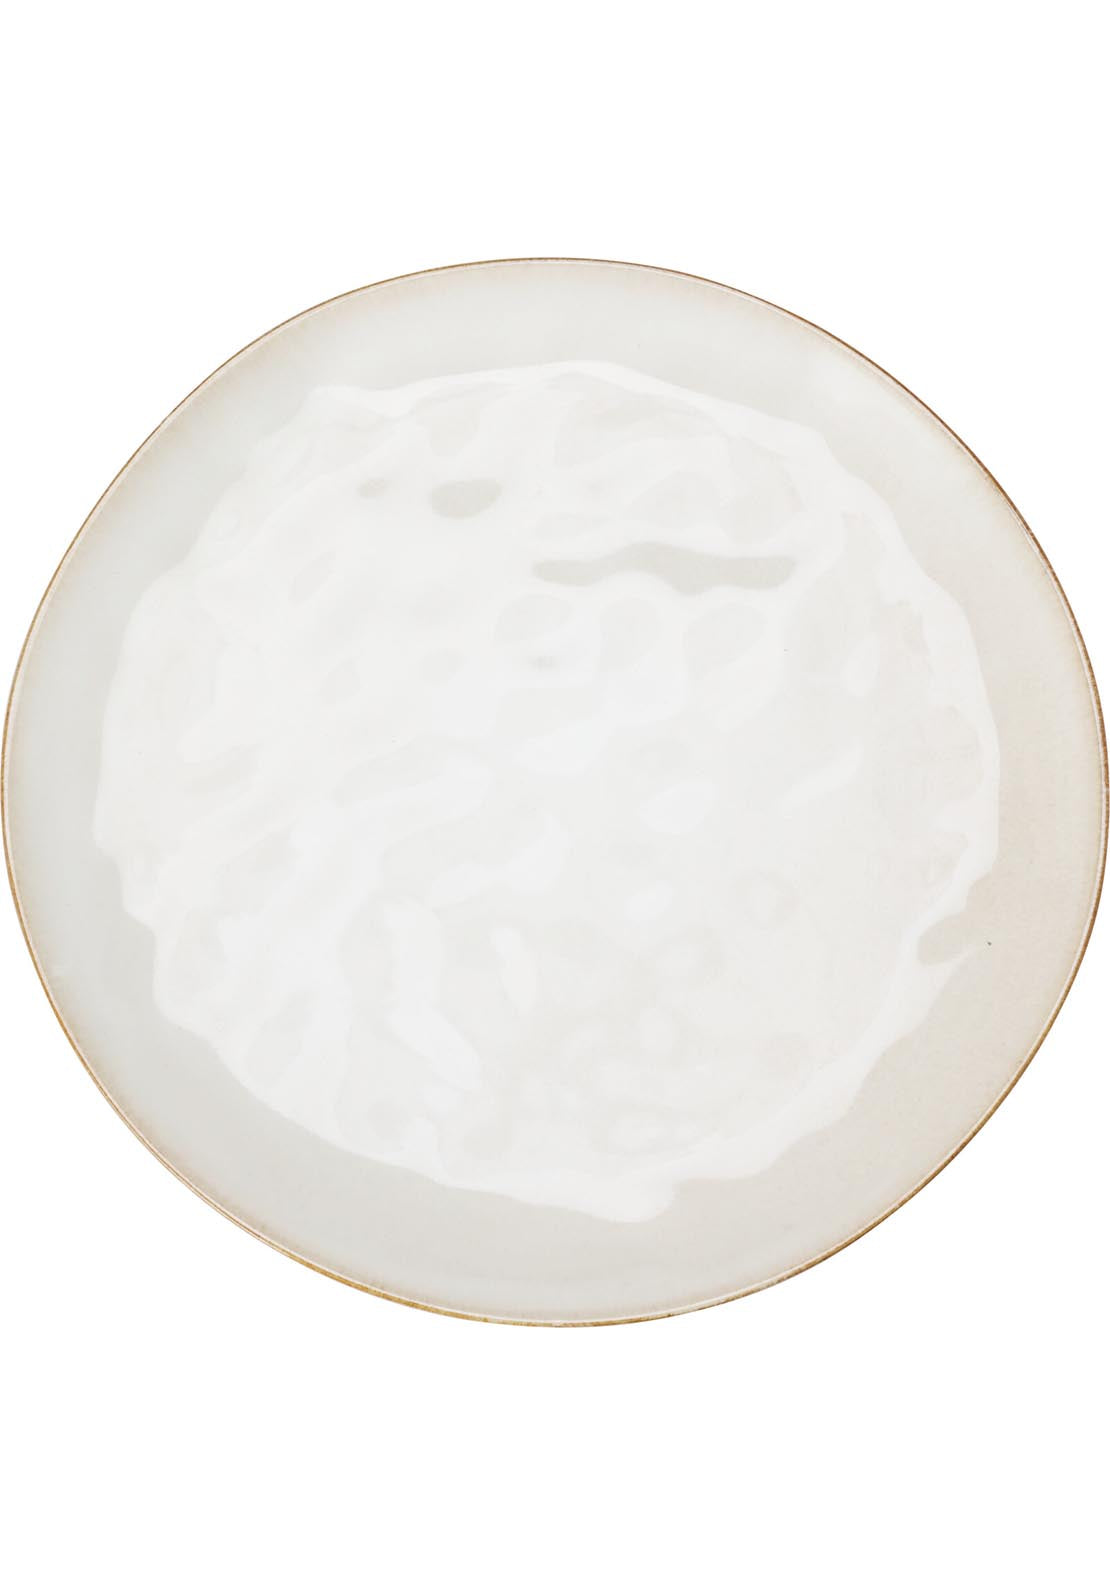 The Home Dining Plate Stoneware 278mm x 28mm 1 Shaws Department Stores